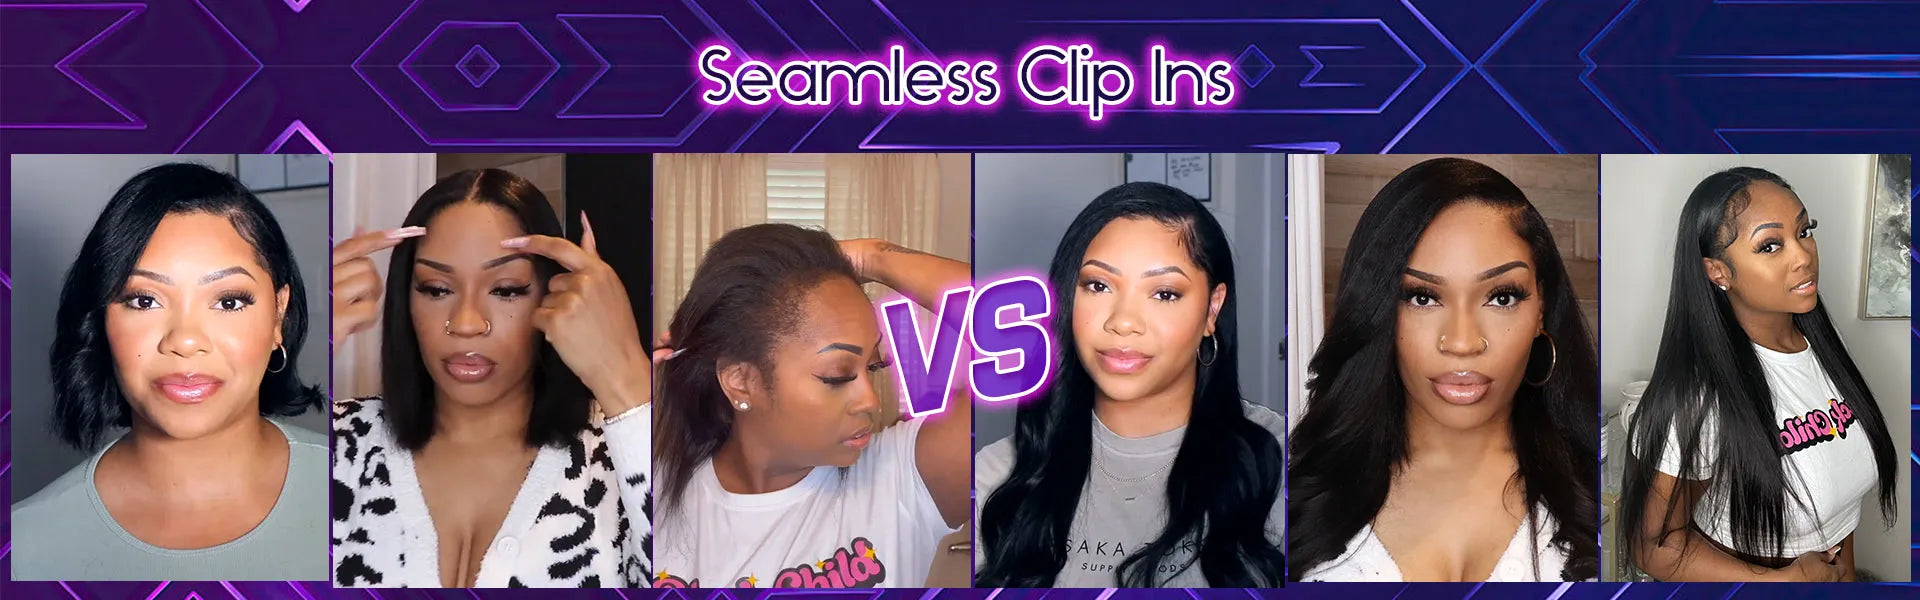 seamless clip ins before vs after look